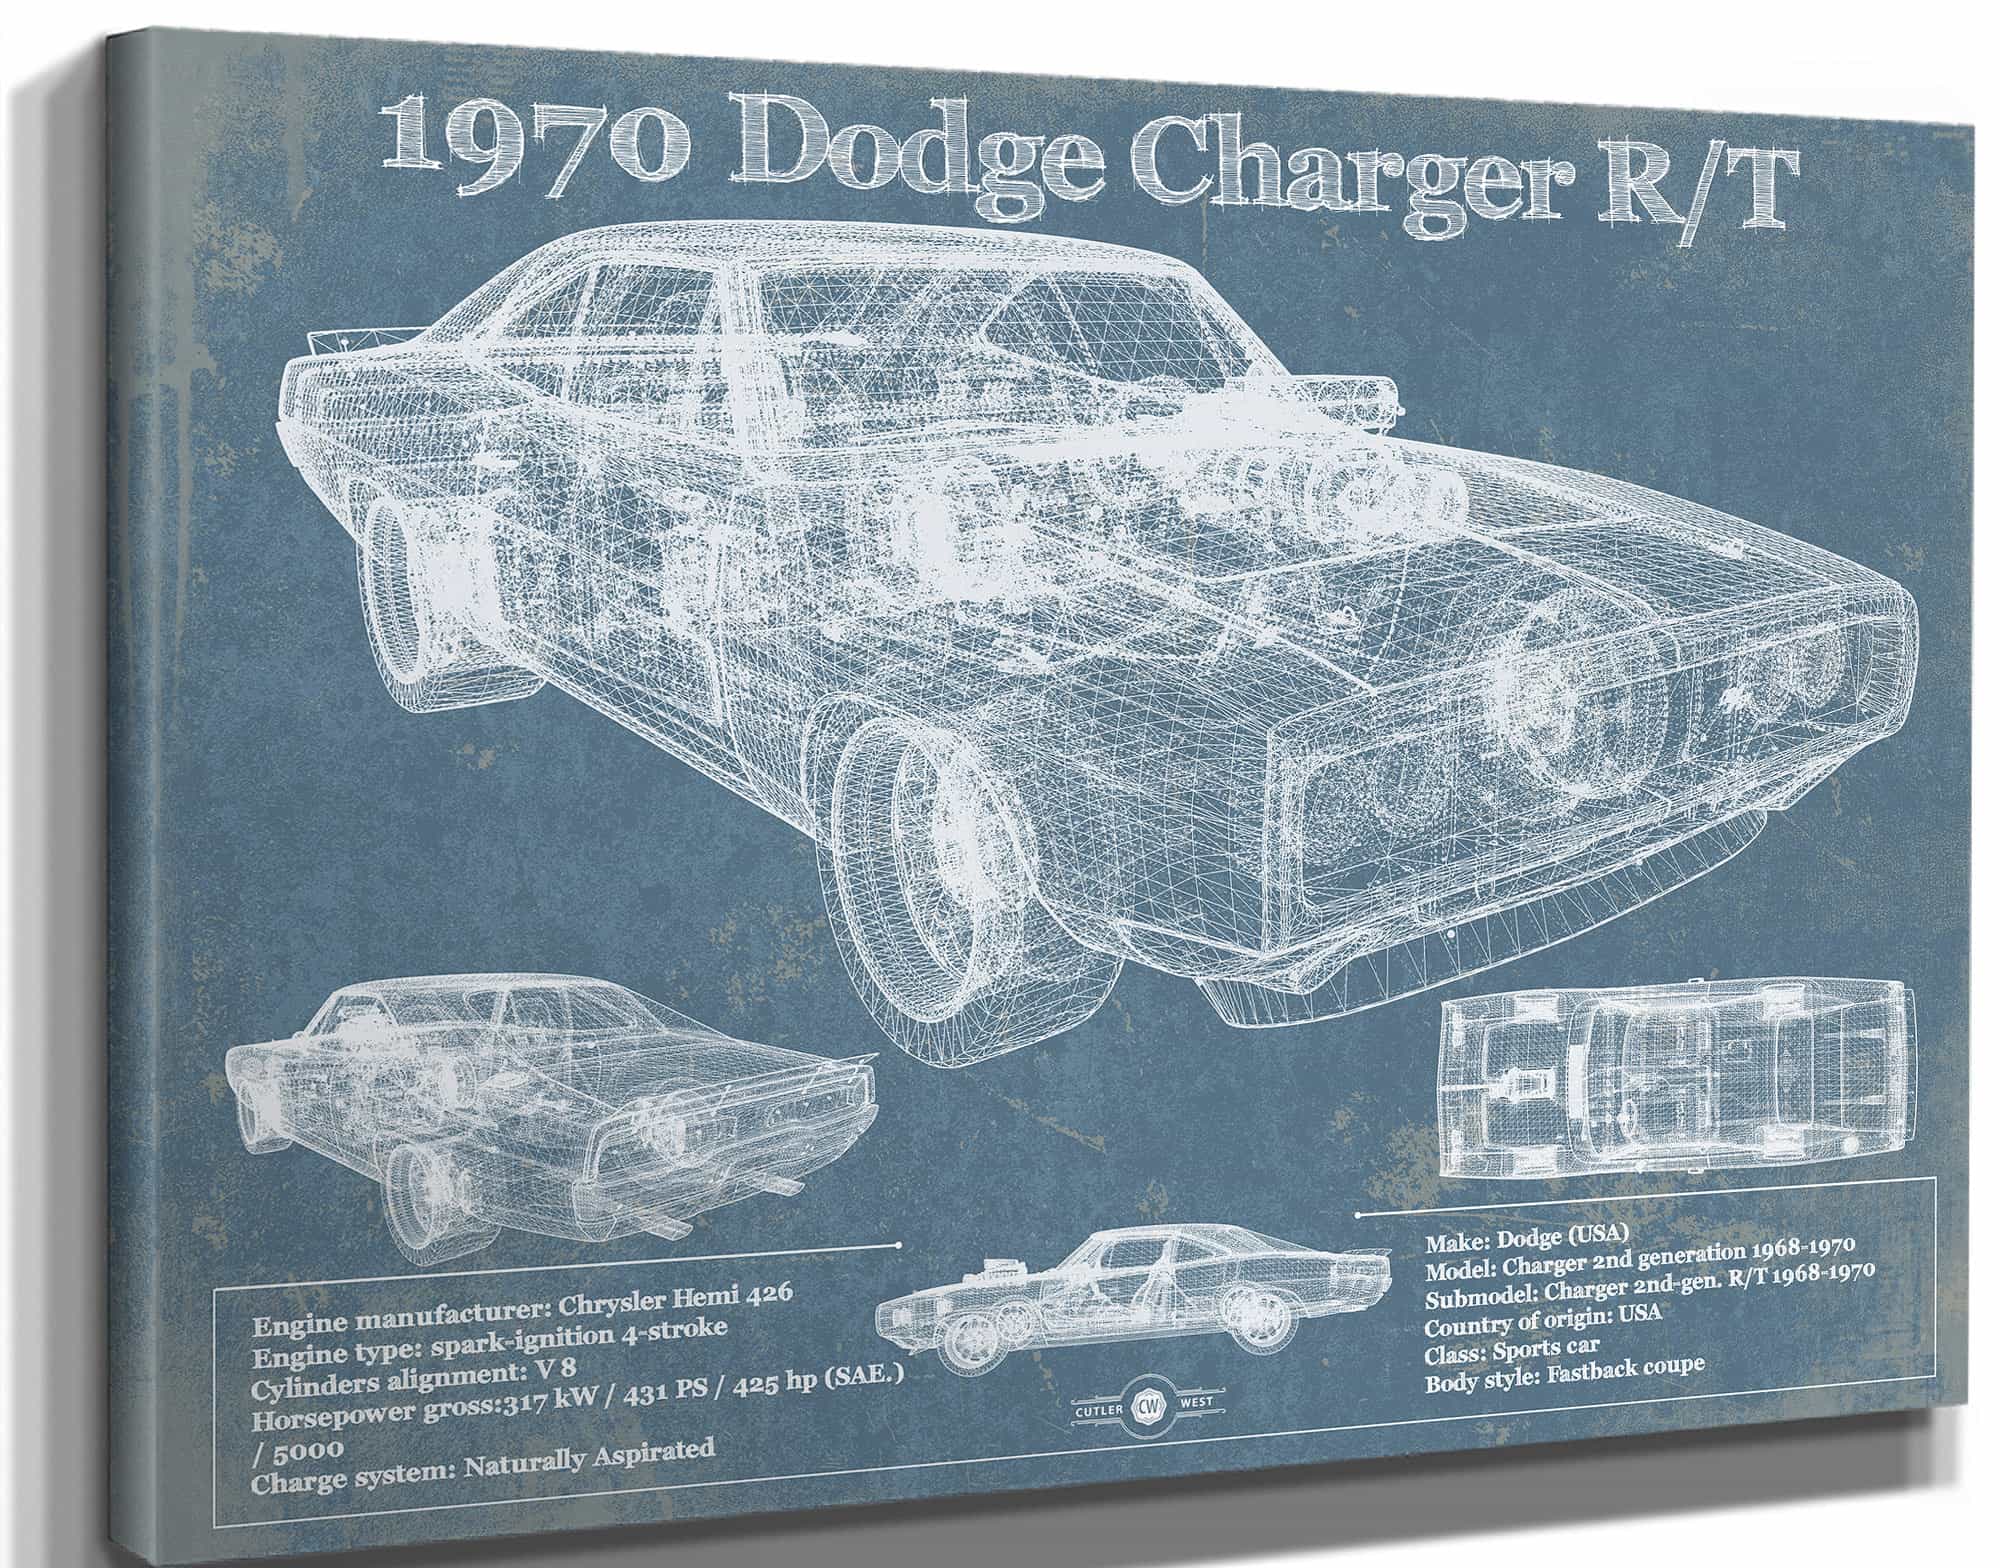 Dodge Charger 1970 R/T (Fast and Furious) Sports Car Blueprint Patent Original Art